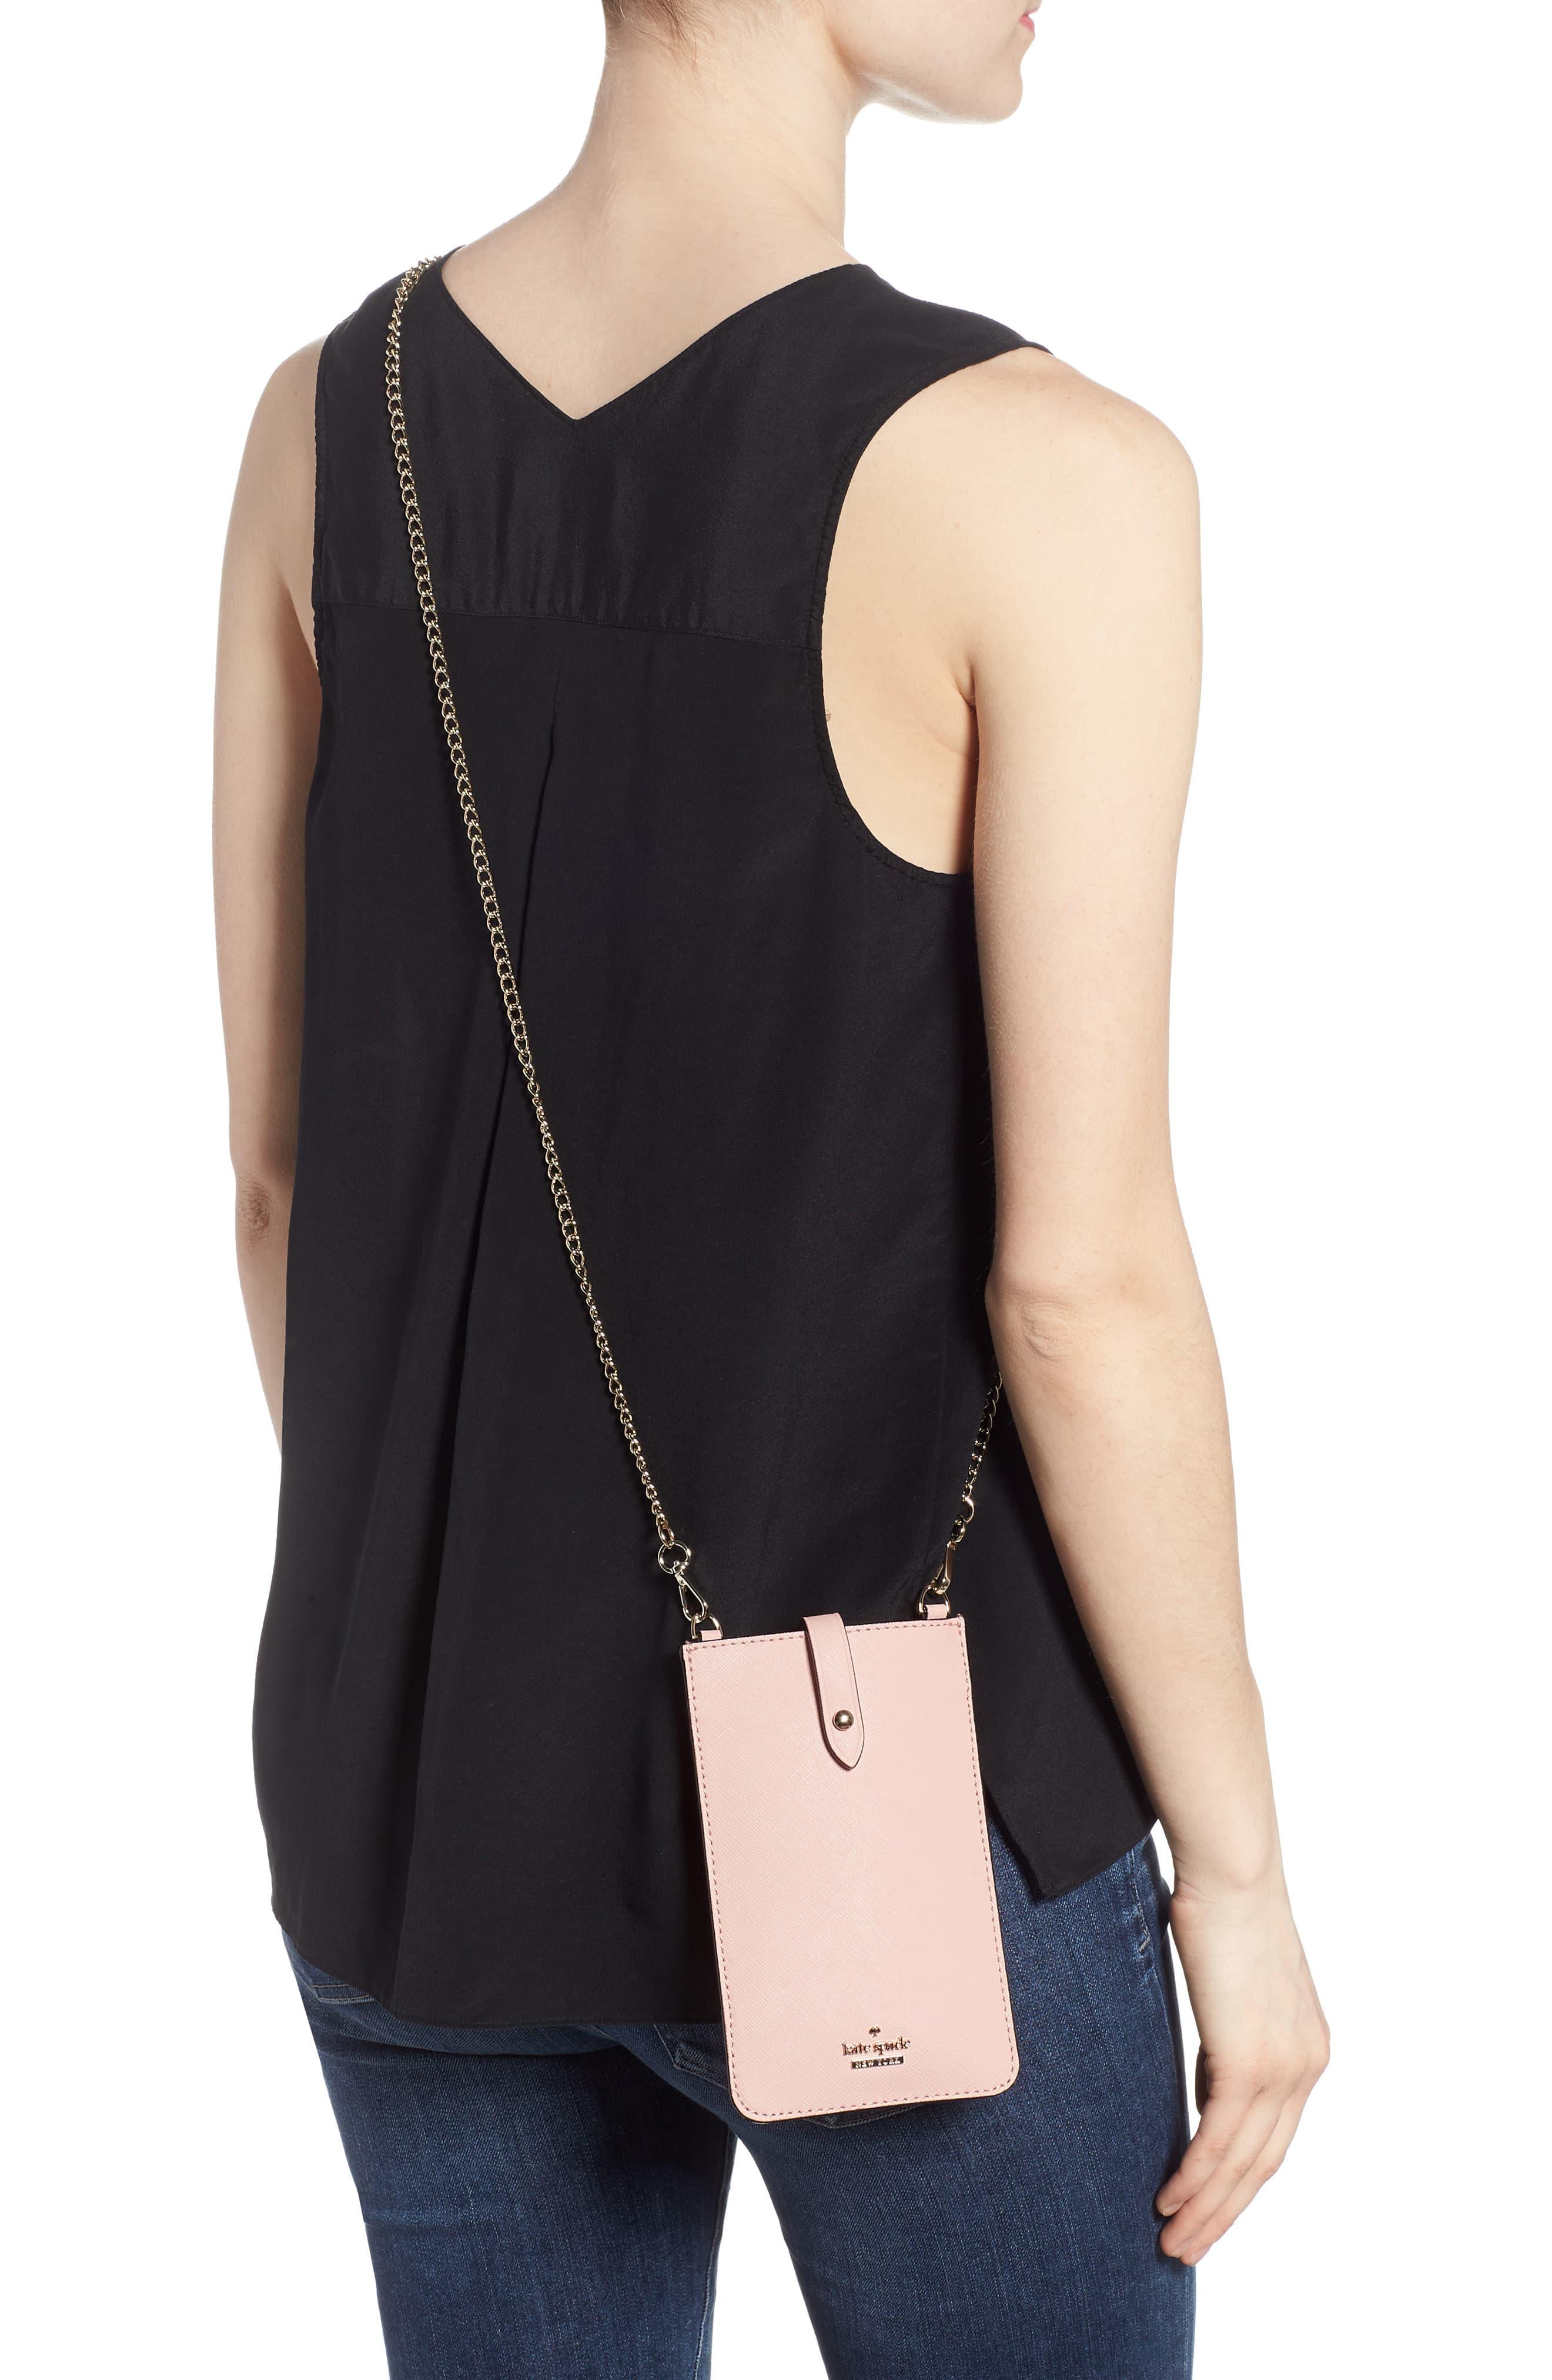 Kate Spade Leather Iphone Crossbody Bag in Pink - Lyst